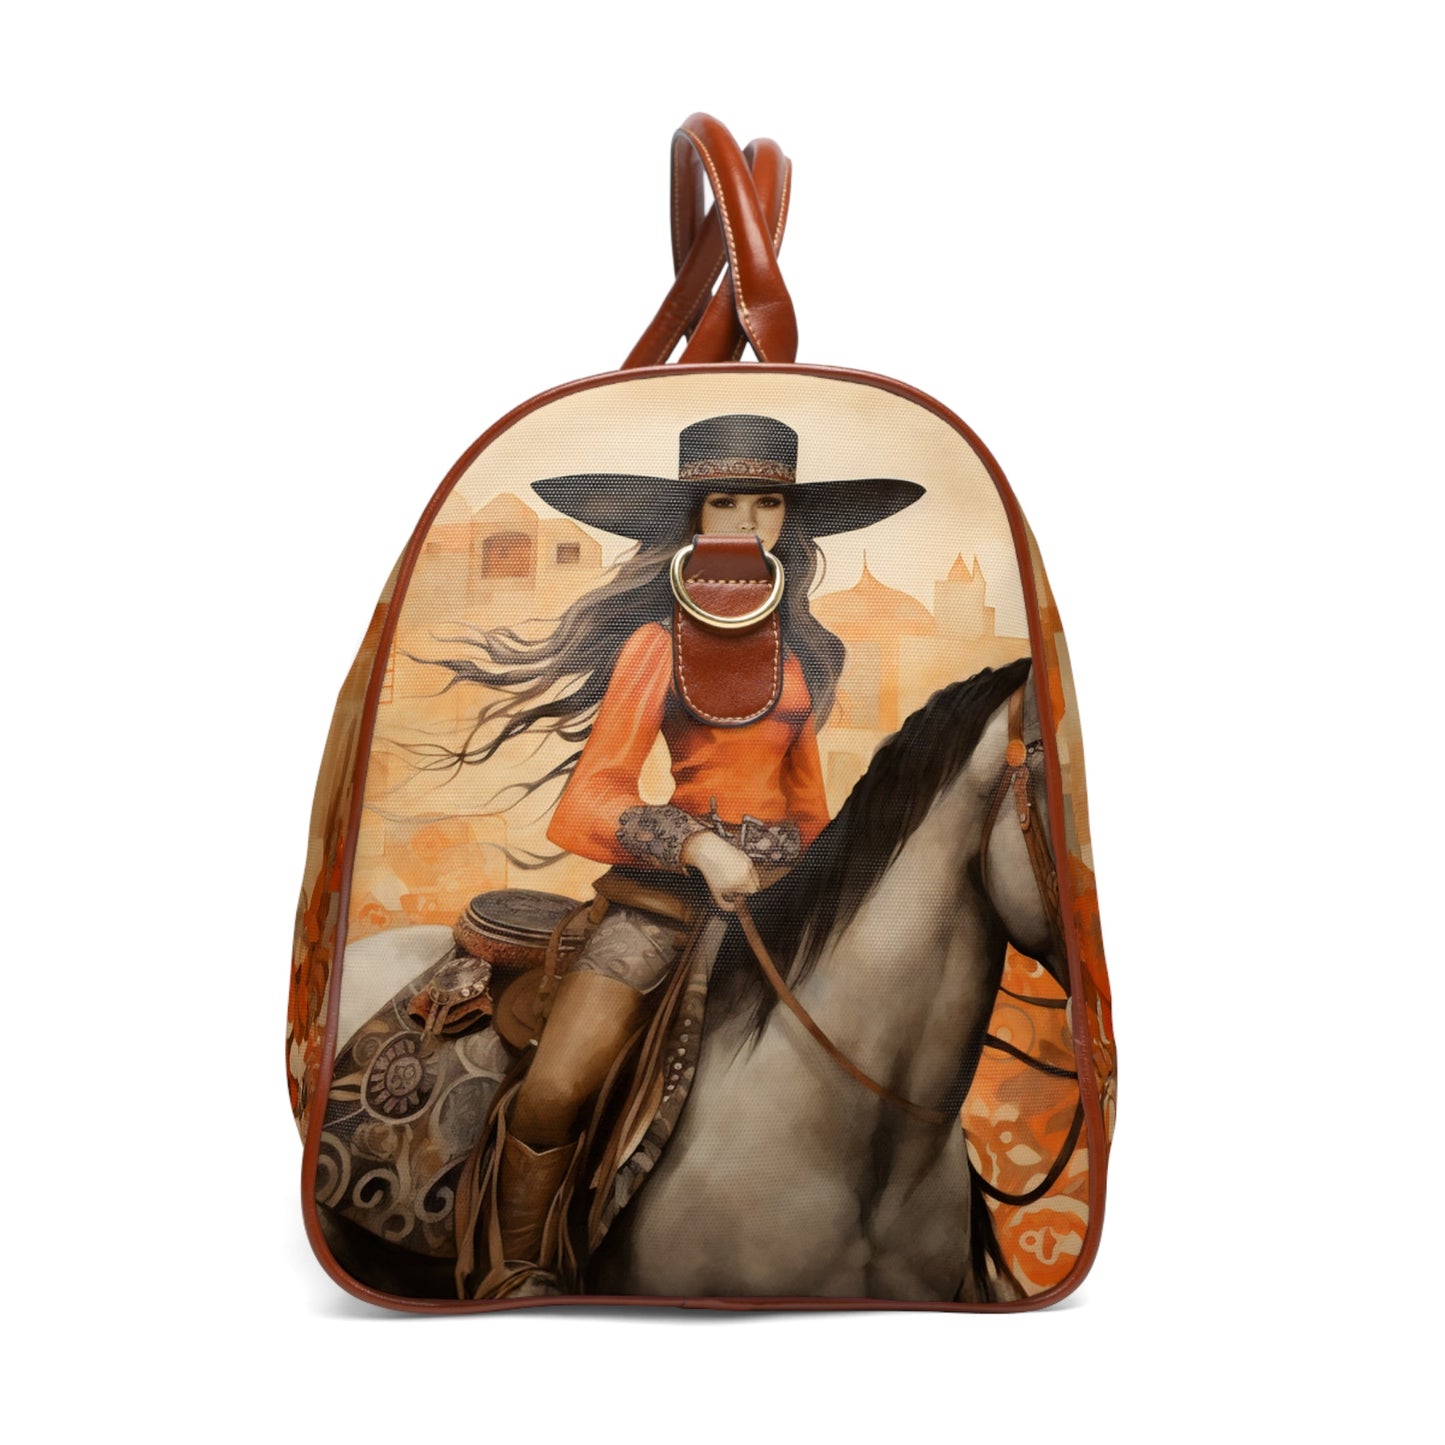 Vaquera Art Travel Bag - Bigger than most duffle bags, tote bags and even most weekender bags!